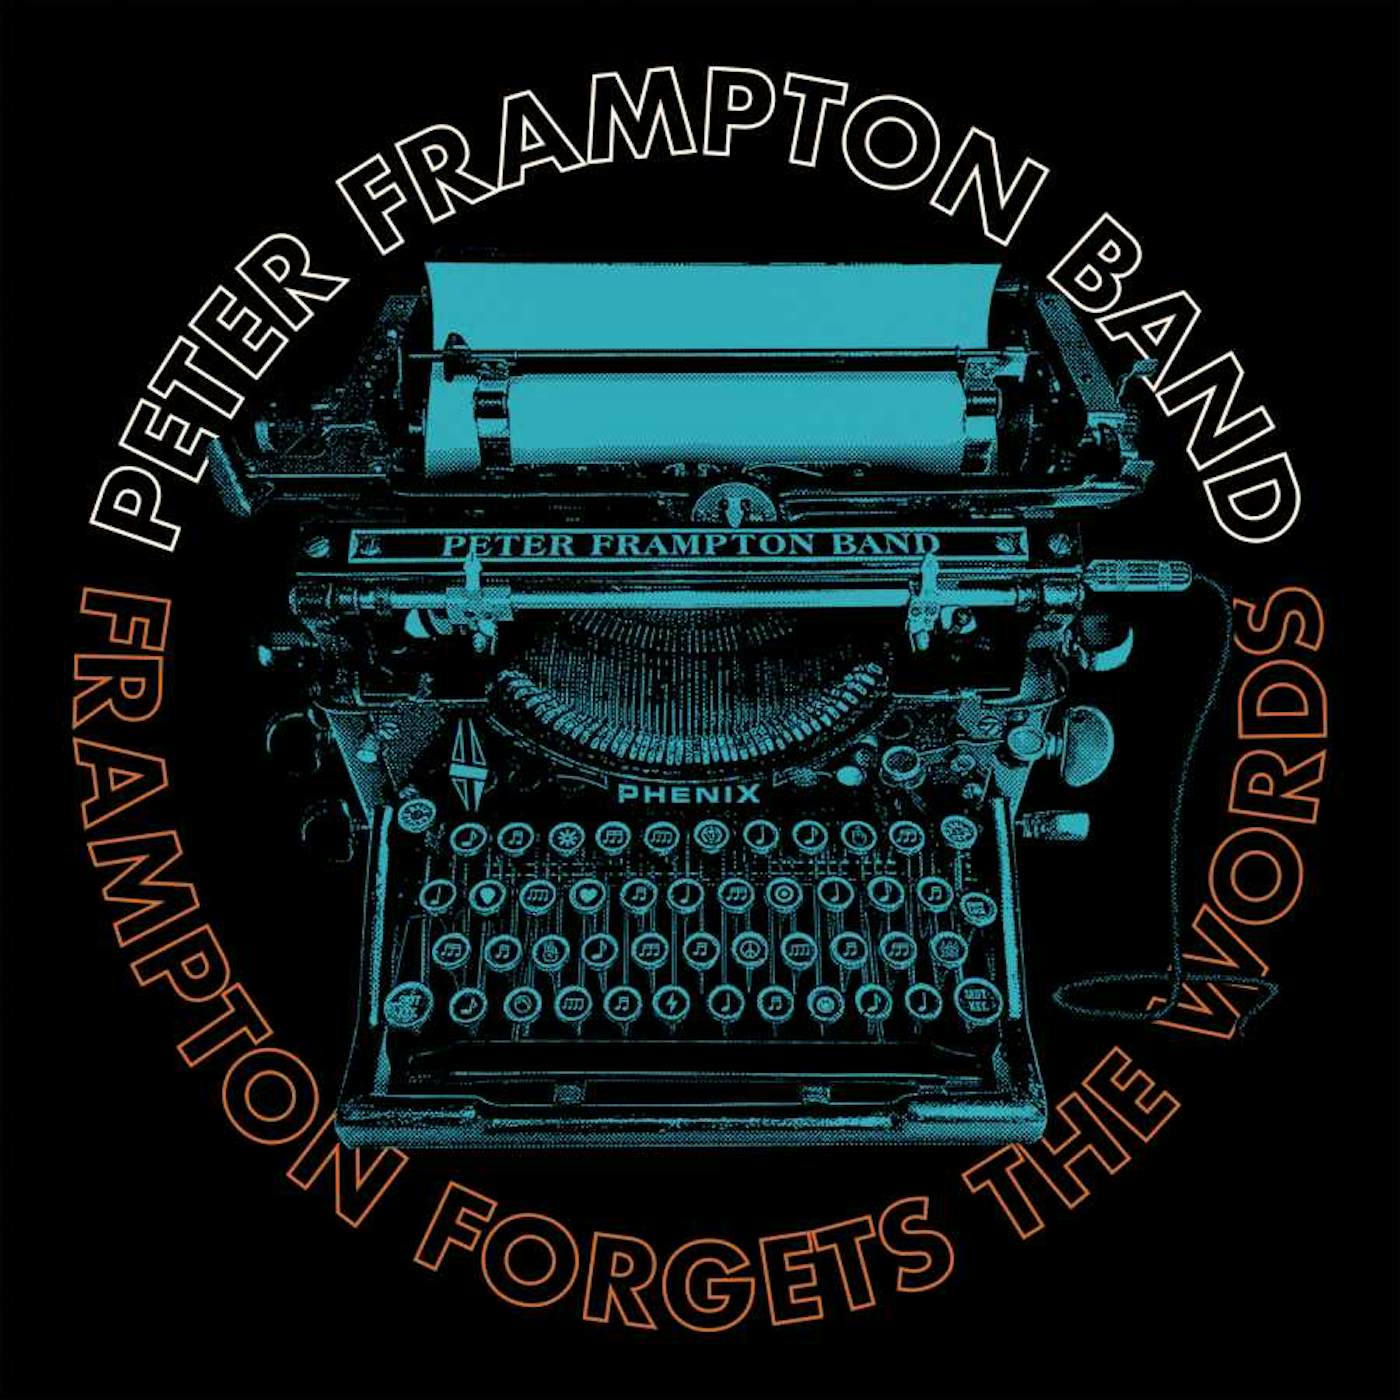 PETER FRAMPTON FORGETS THE WORDS CD